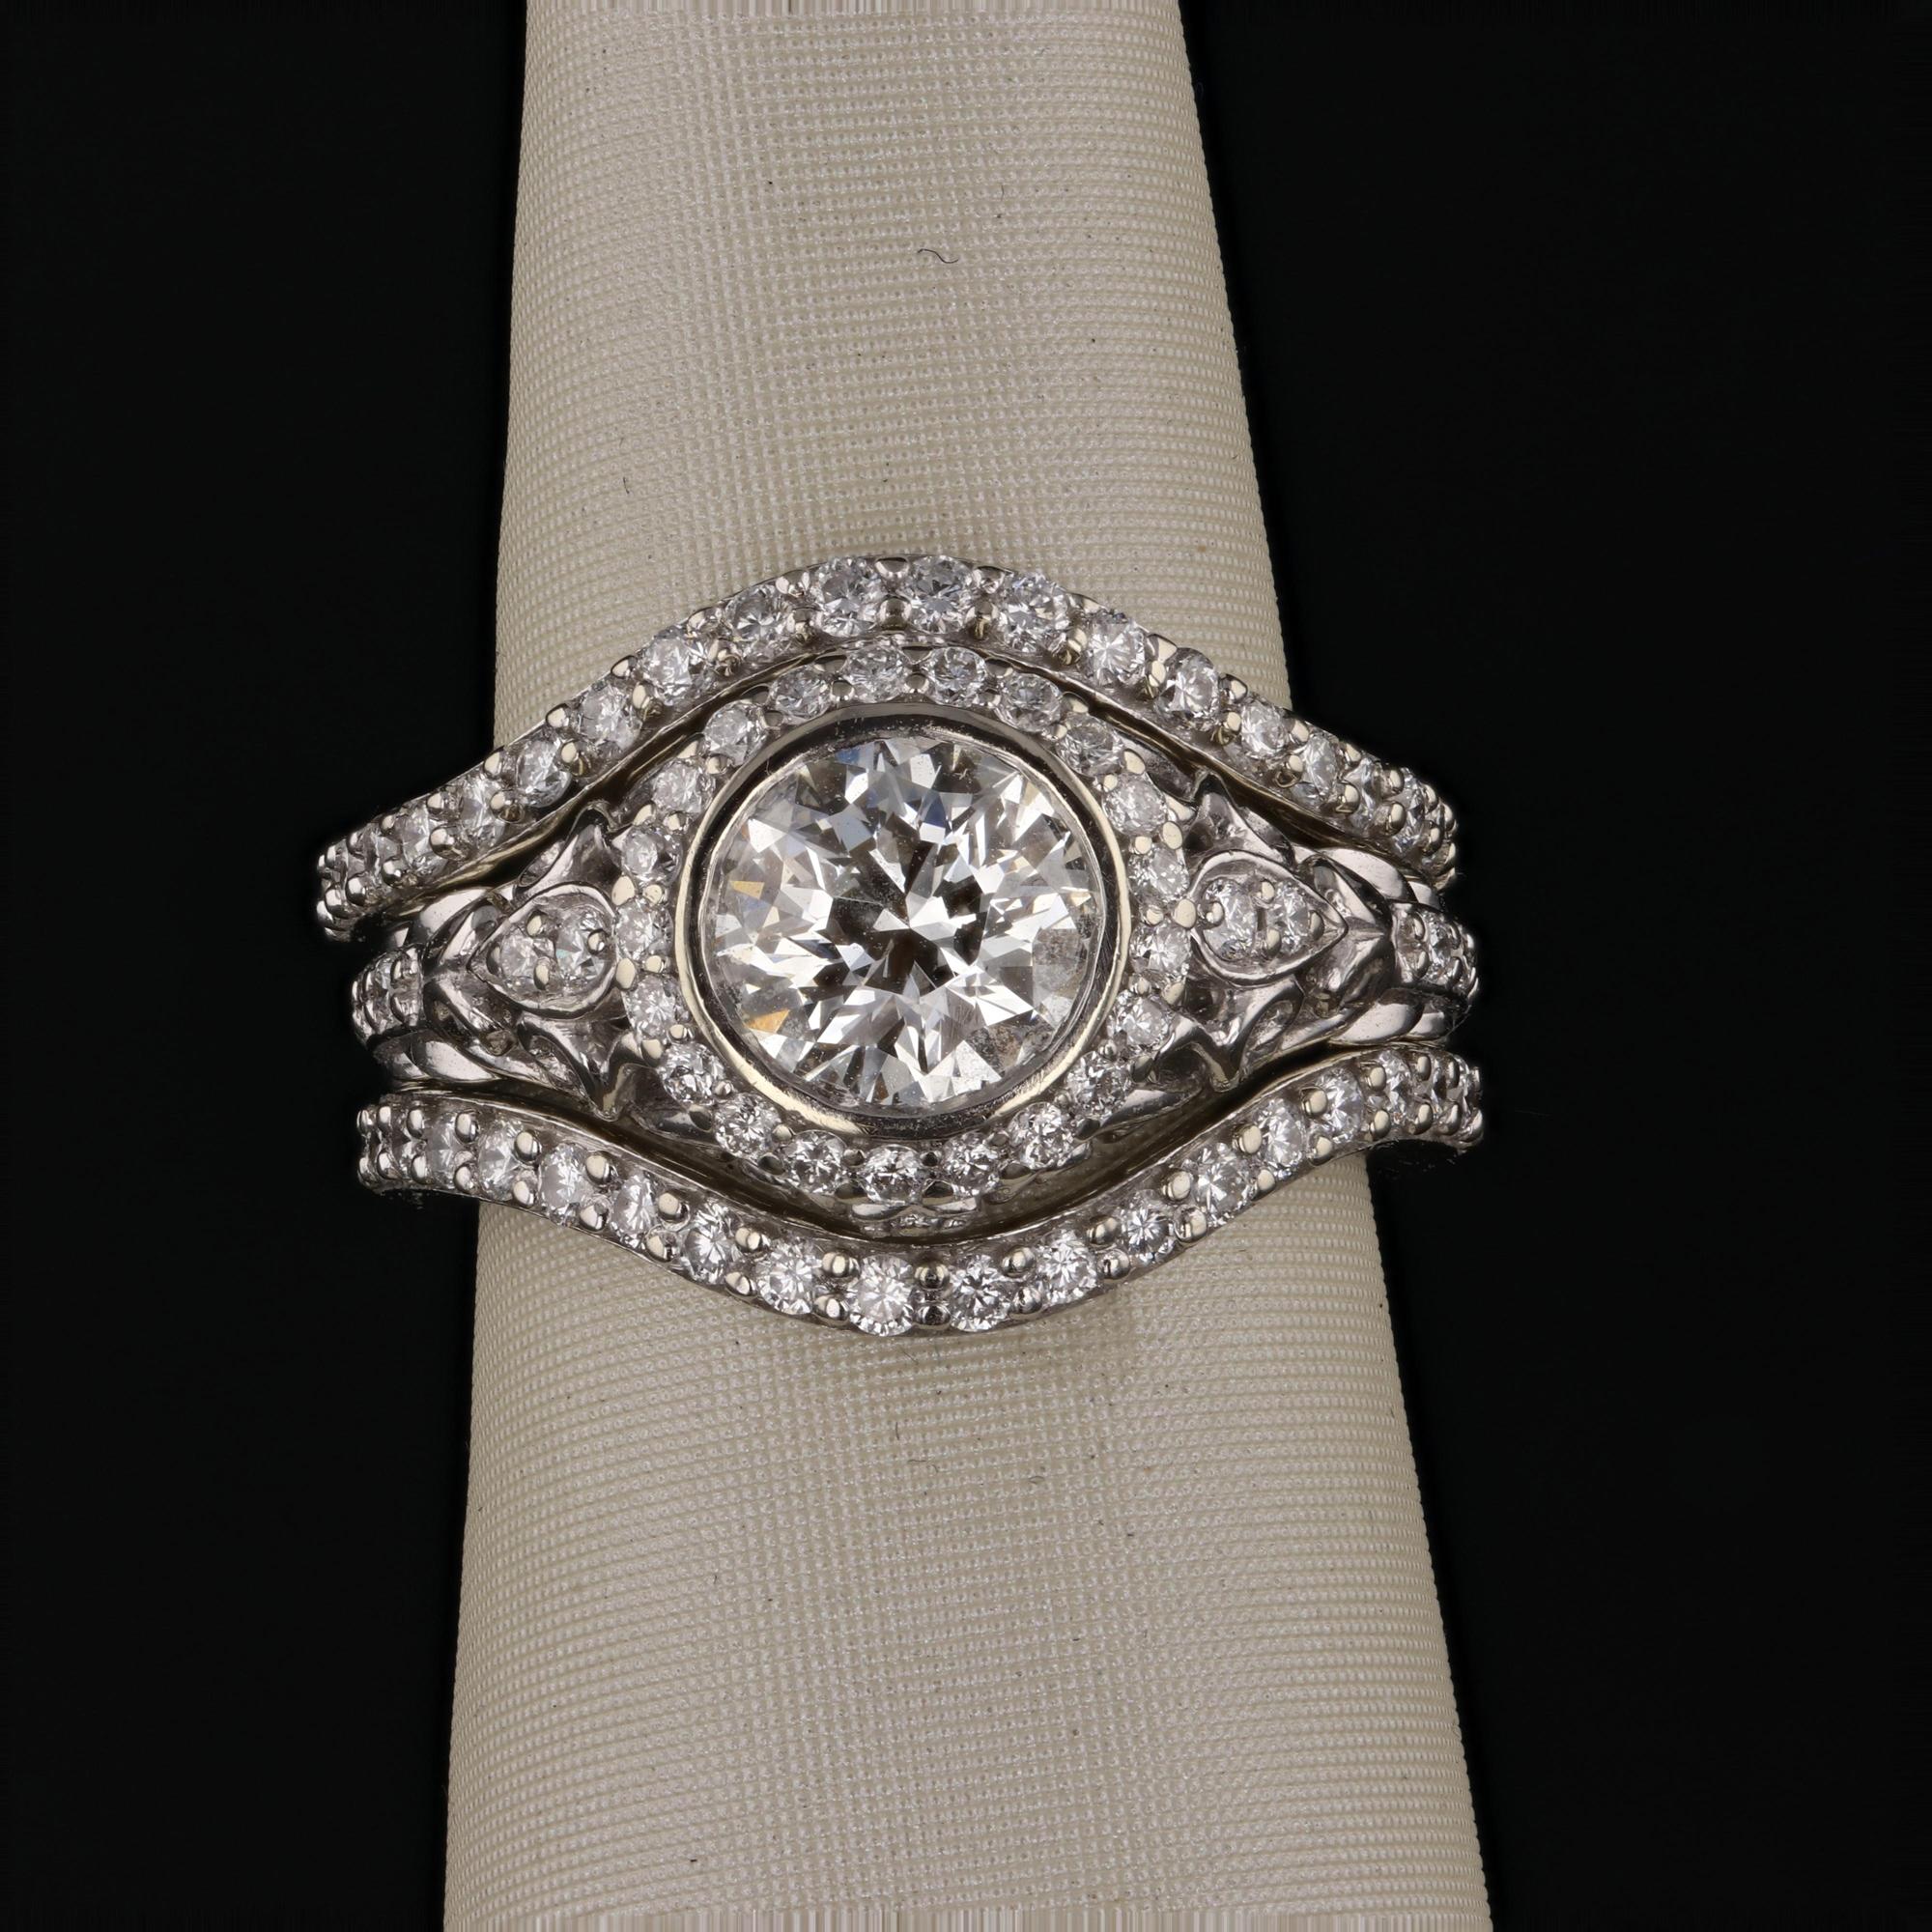 Vintage Inspired 1.13ct Round Diamond & Halo Pave Diamond Engagement Ring Set  For Sale 1